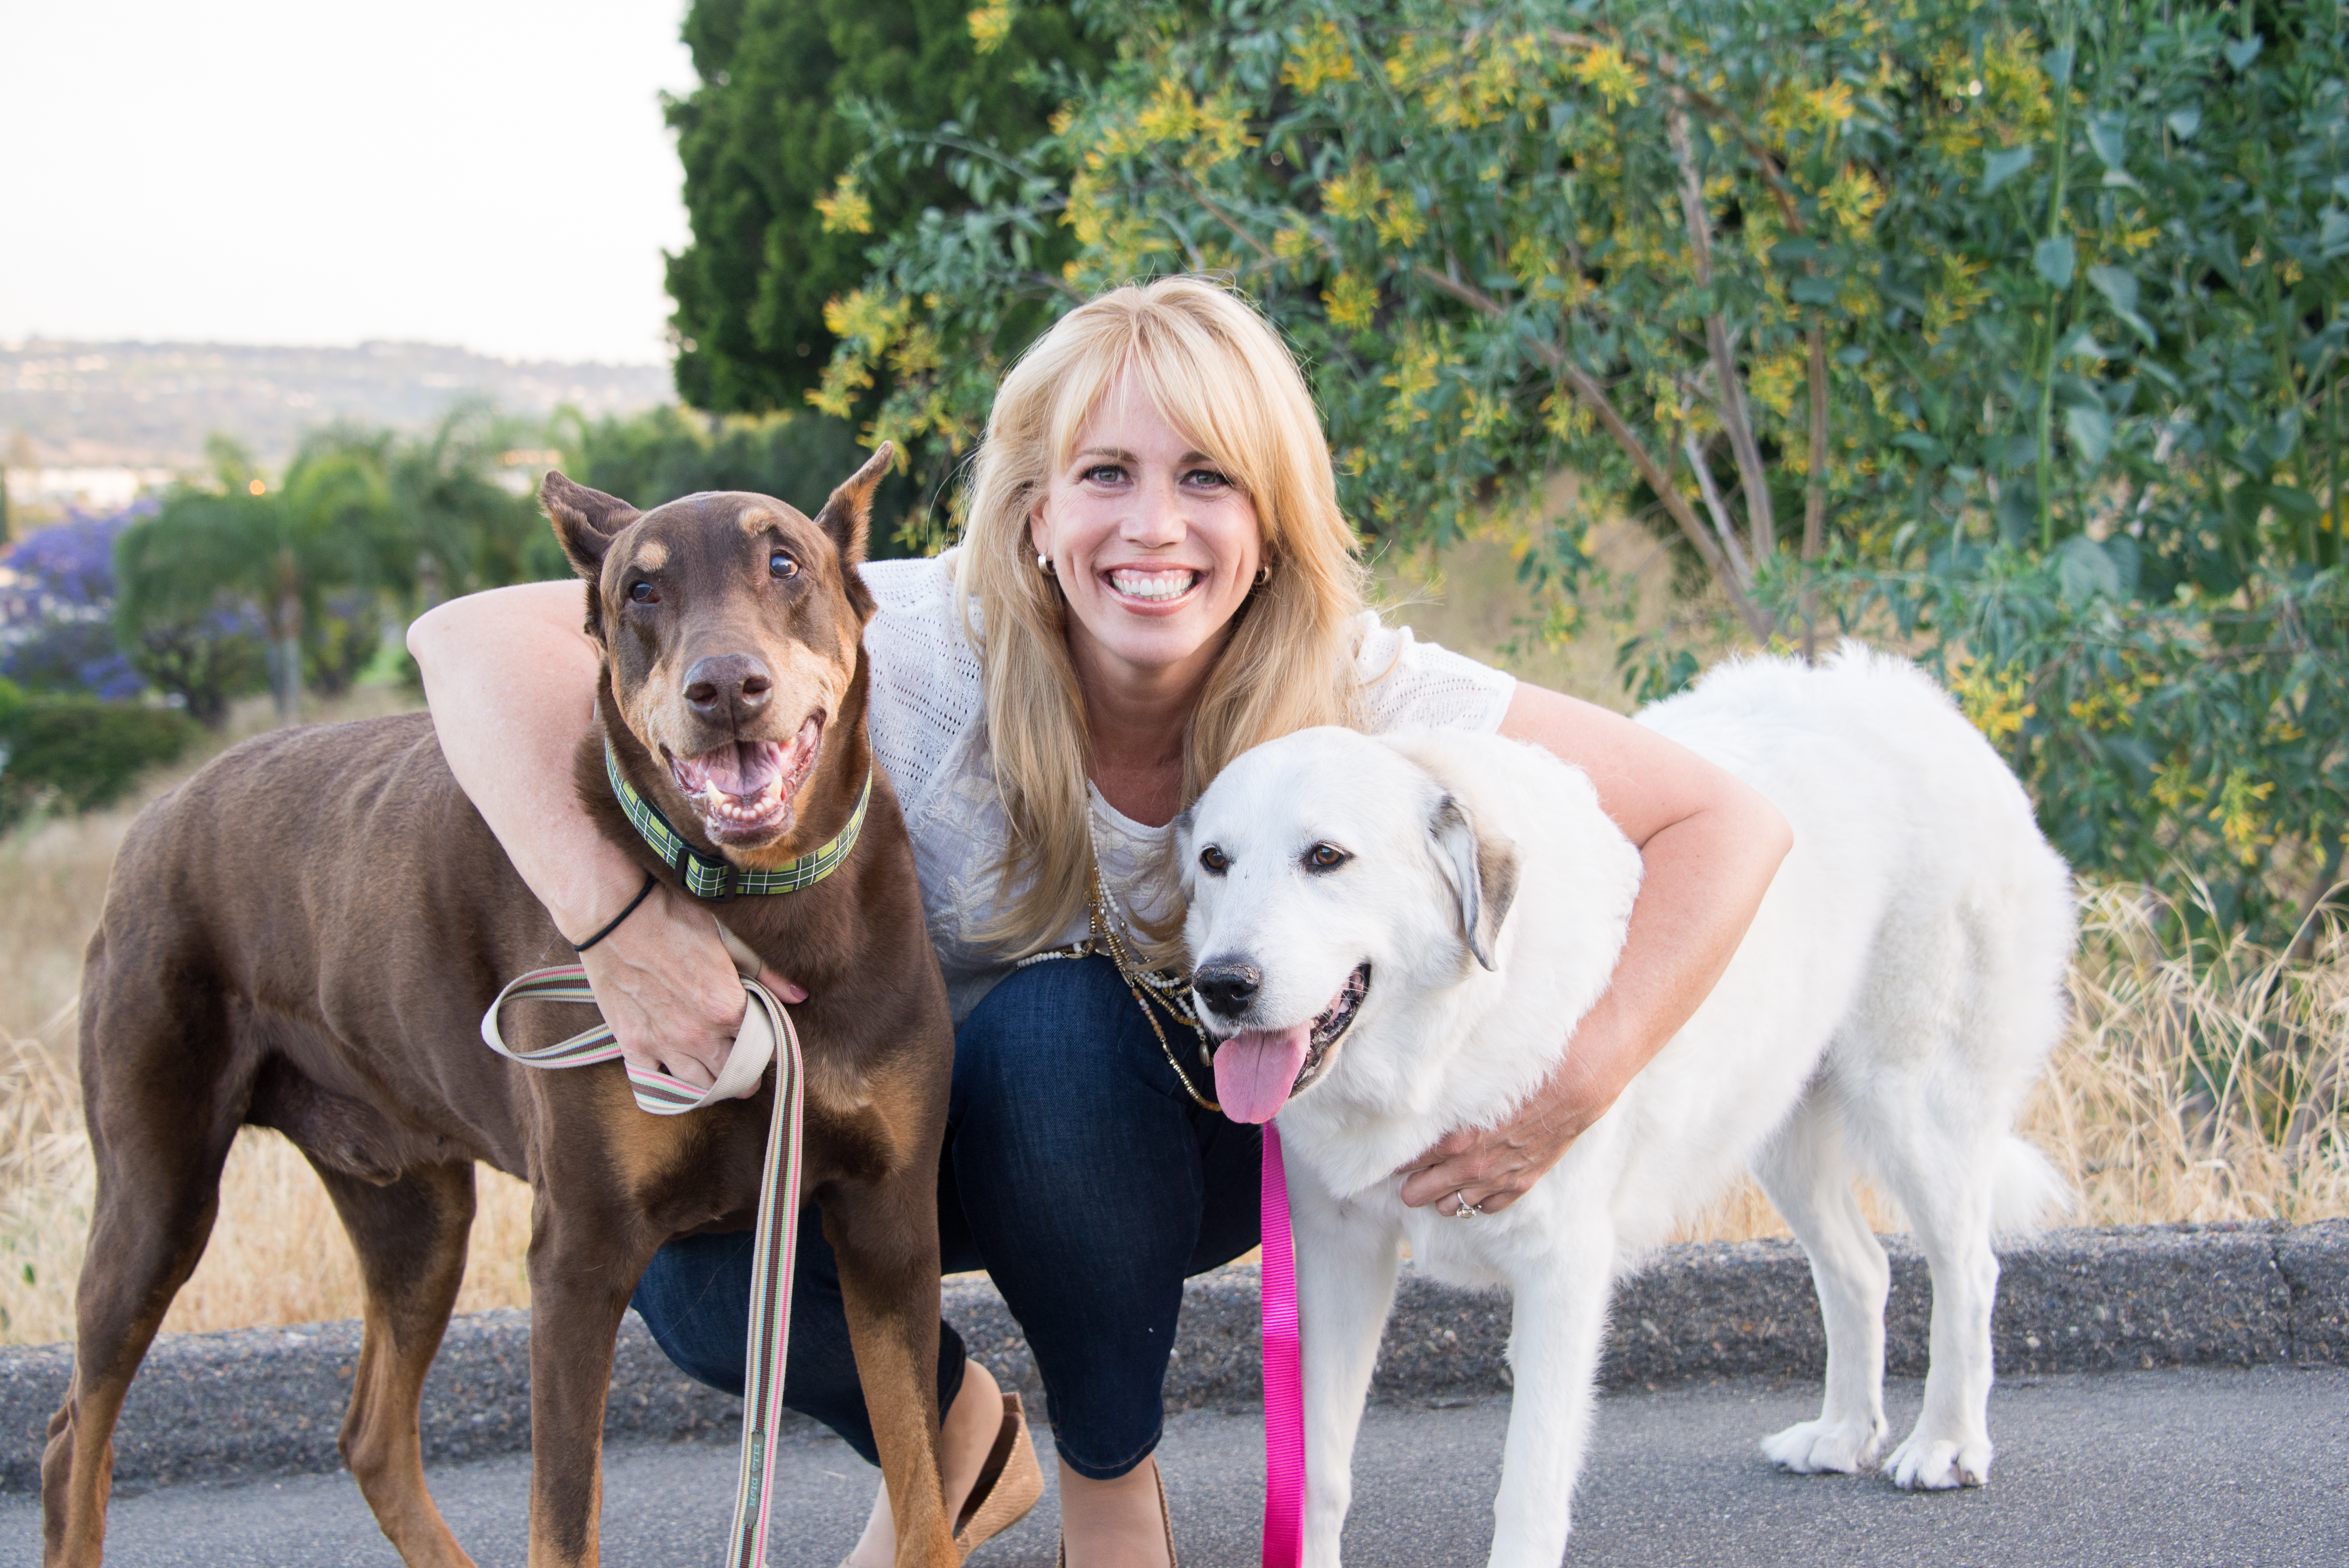 blonde woman between two large dogs